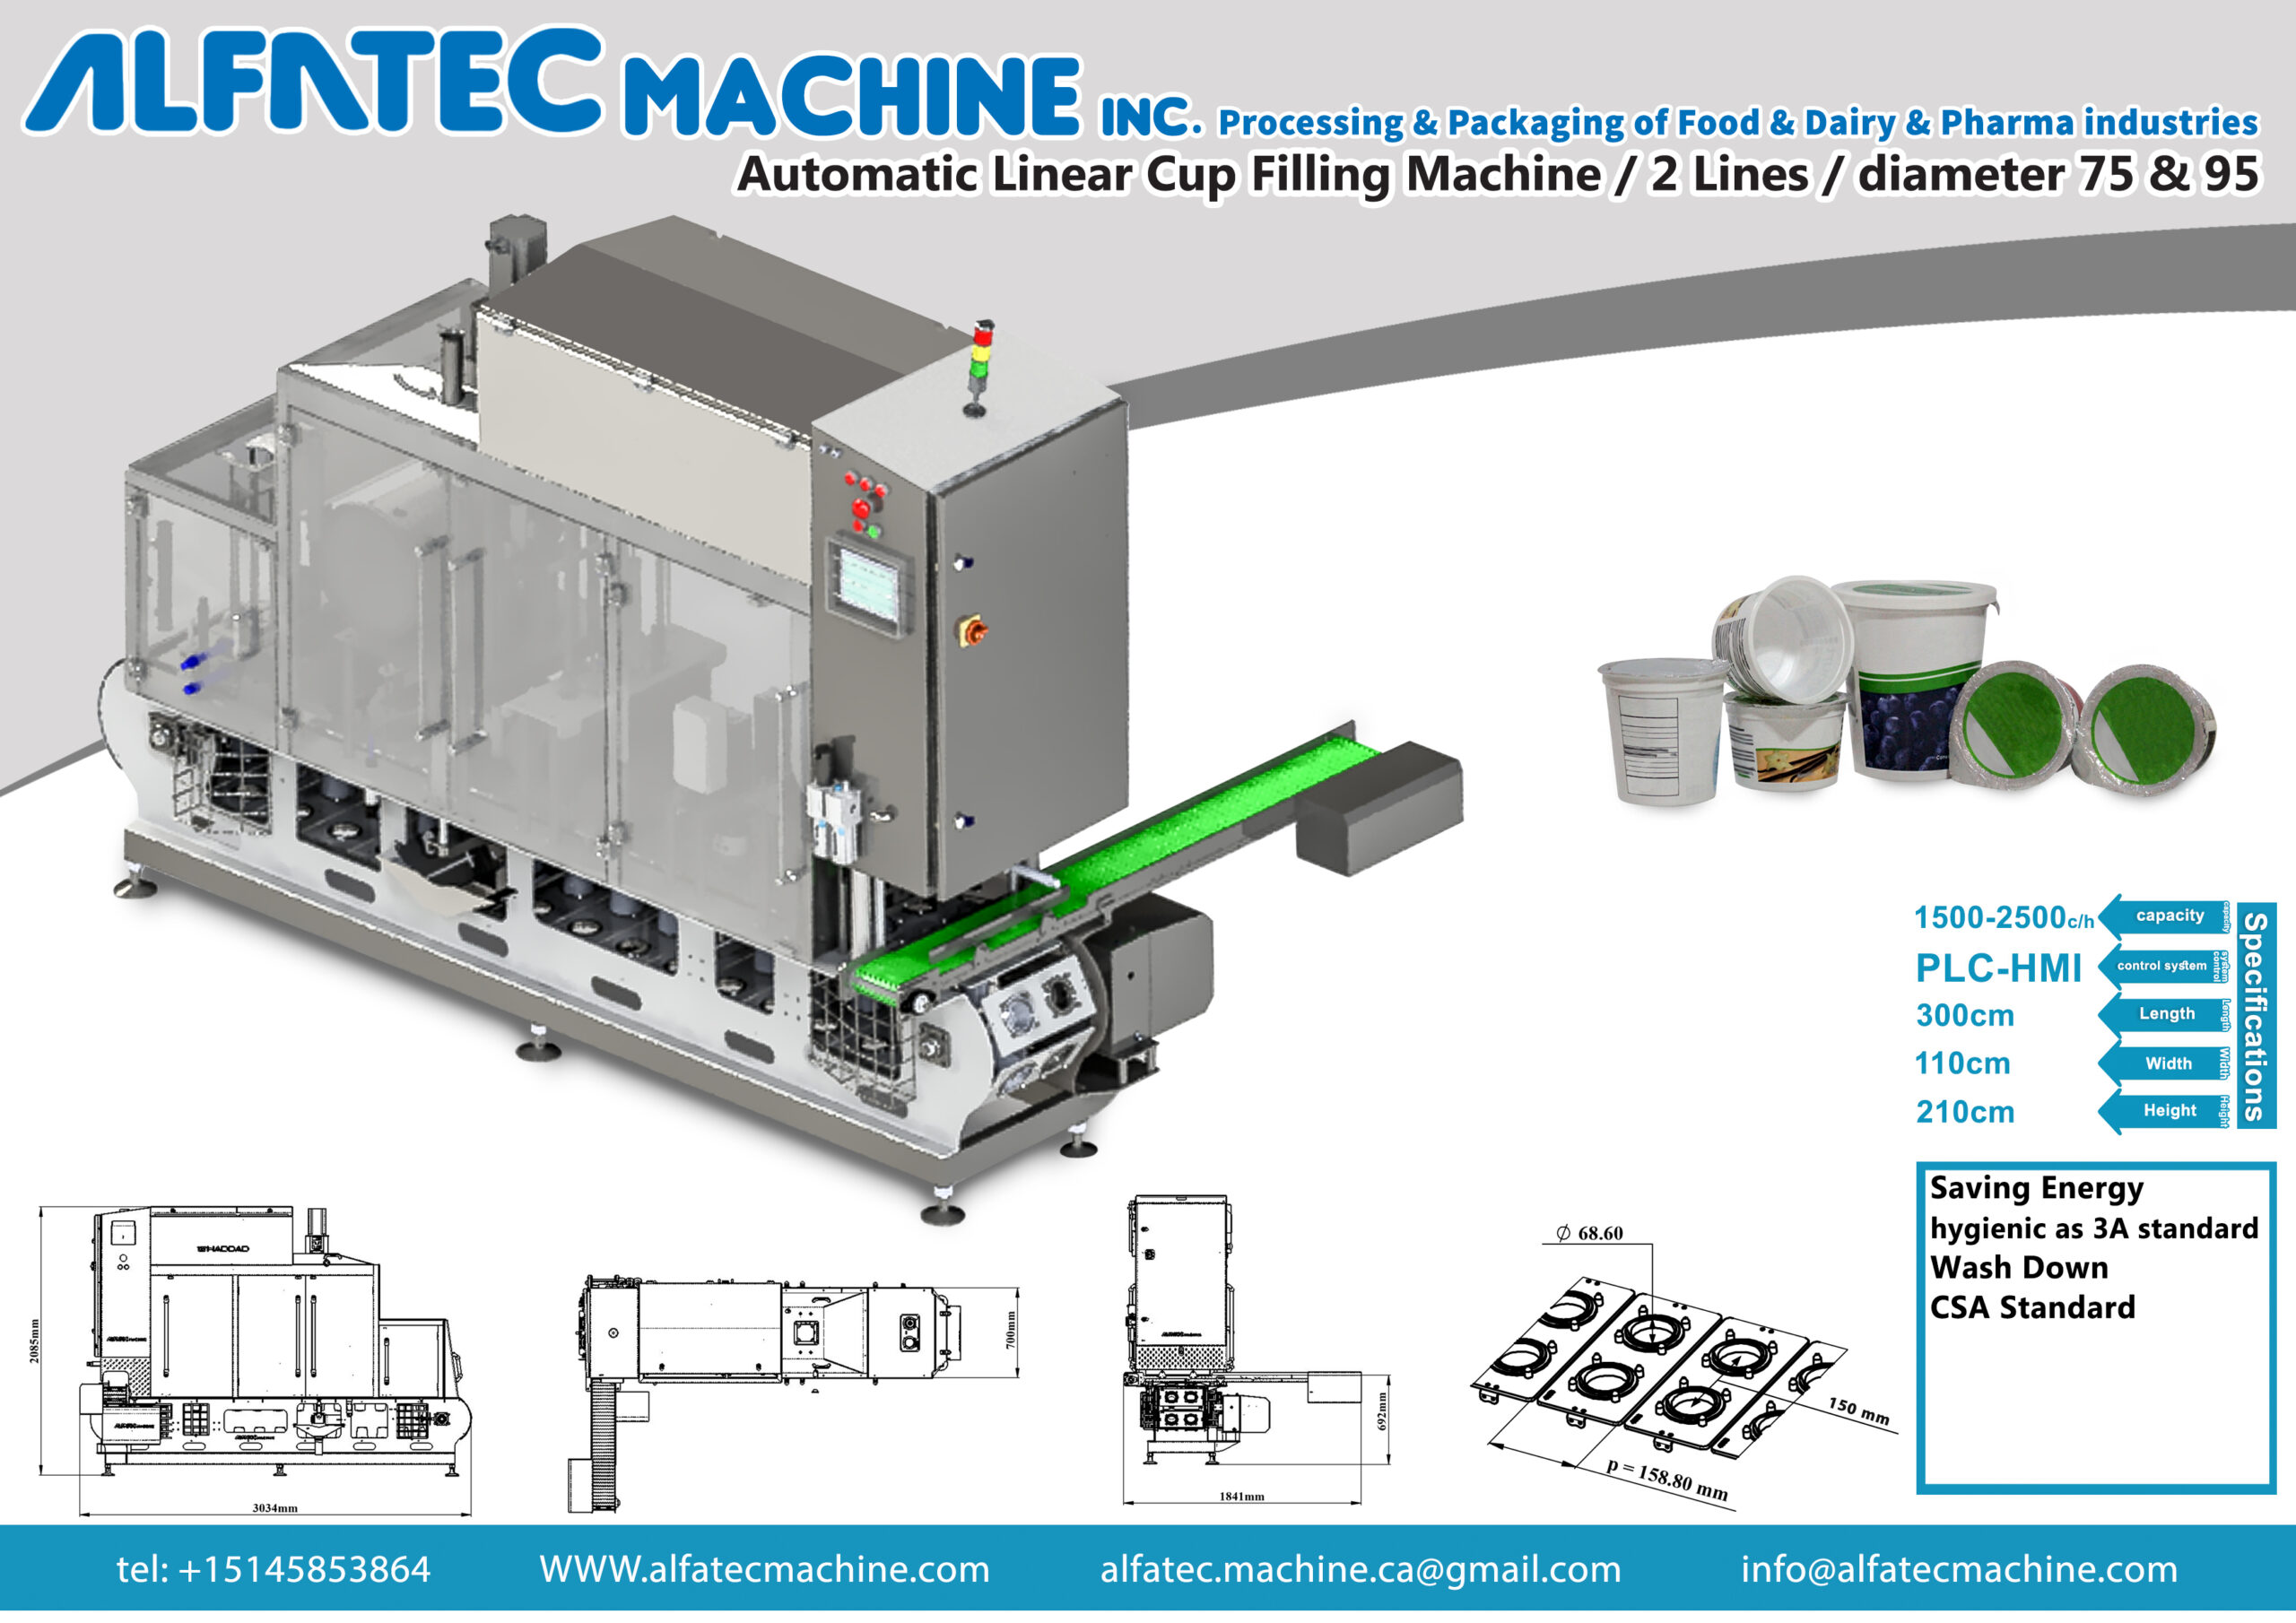 Automatic Linear Cup Filling Machine - 2 Lines- diameter 75 & 95